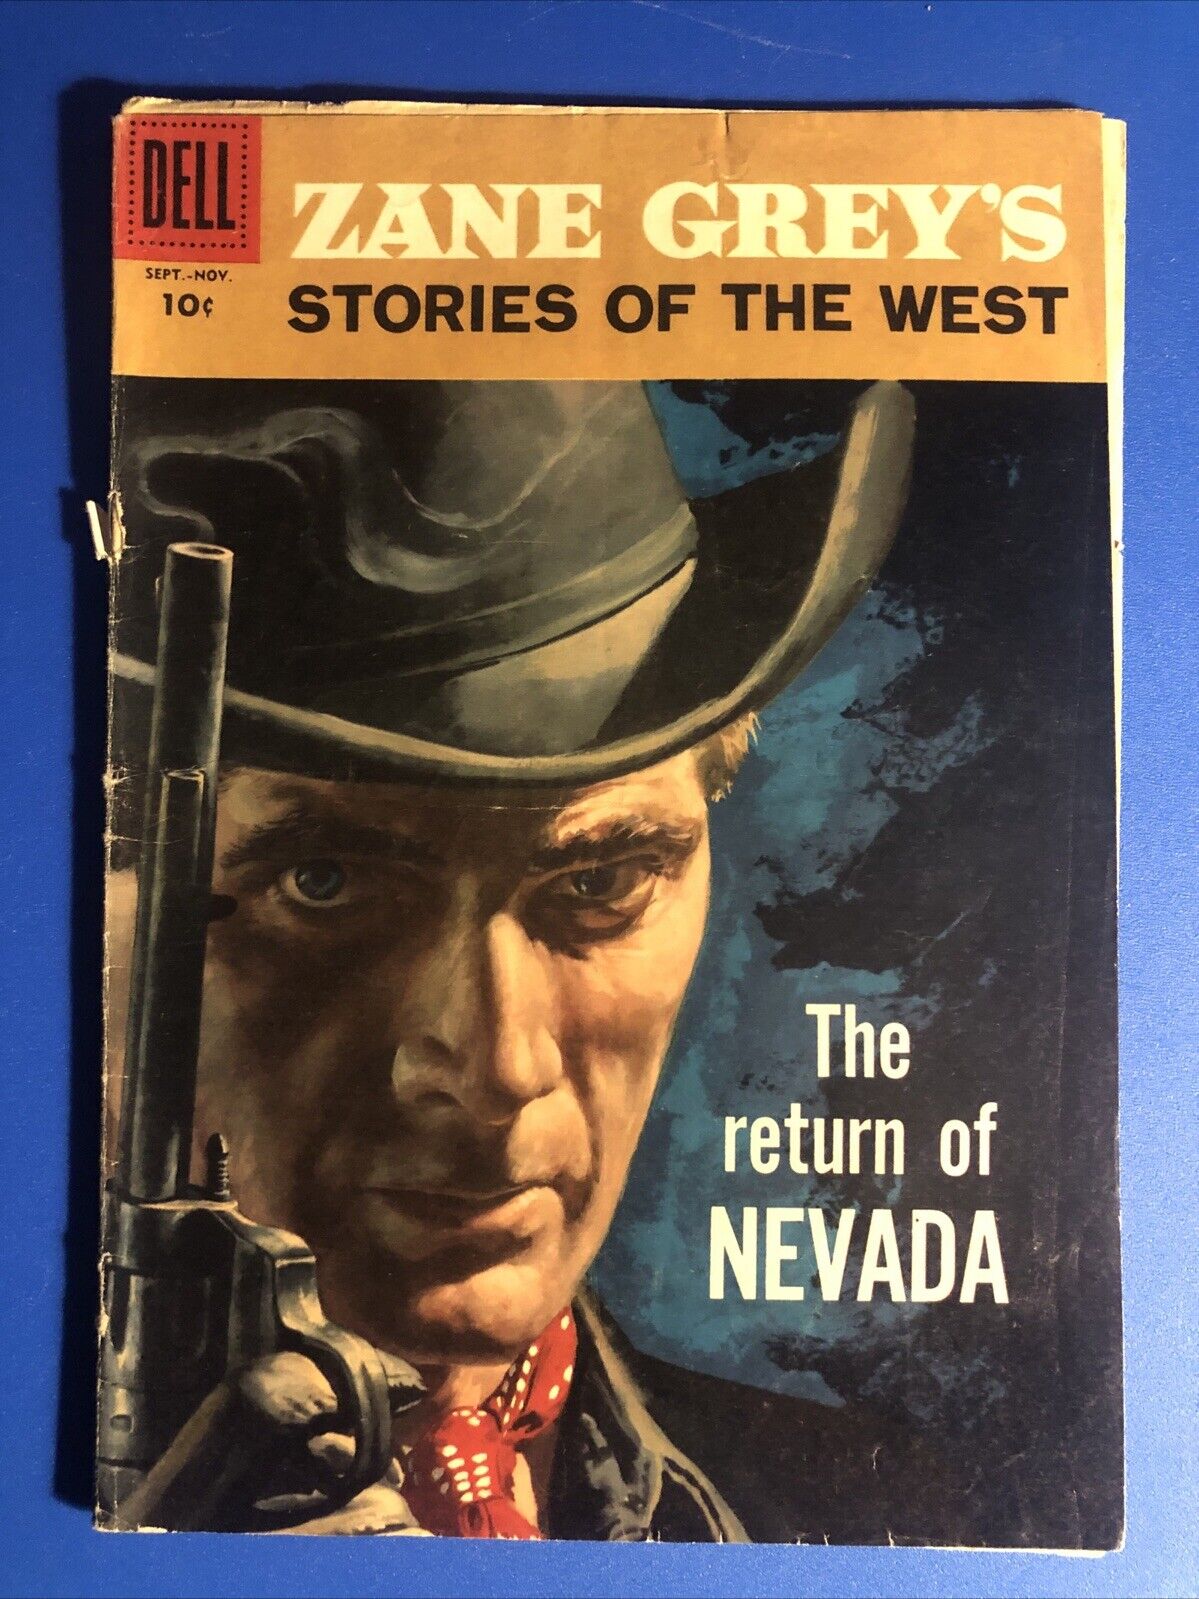 zane grey’s stories of the west “The return of NEVADA”  1958 #39